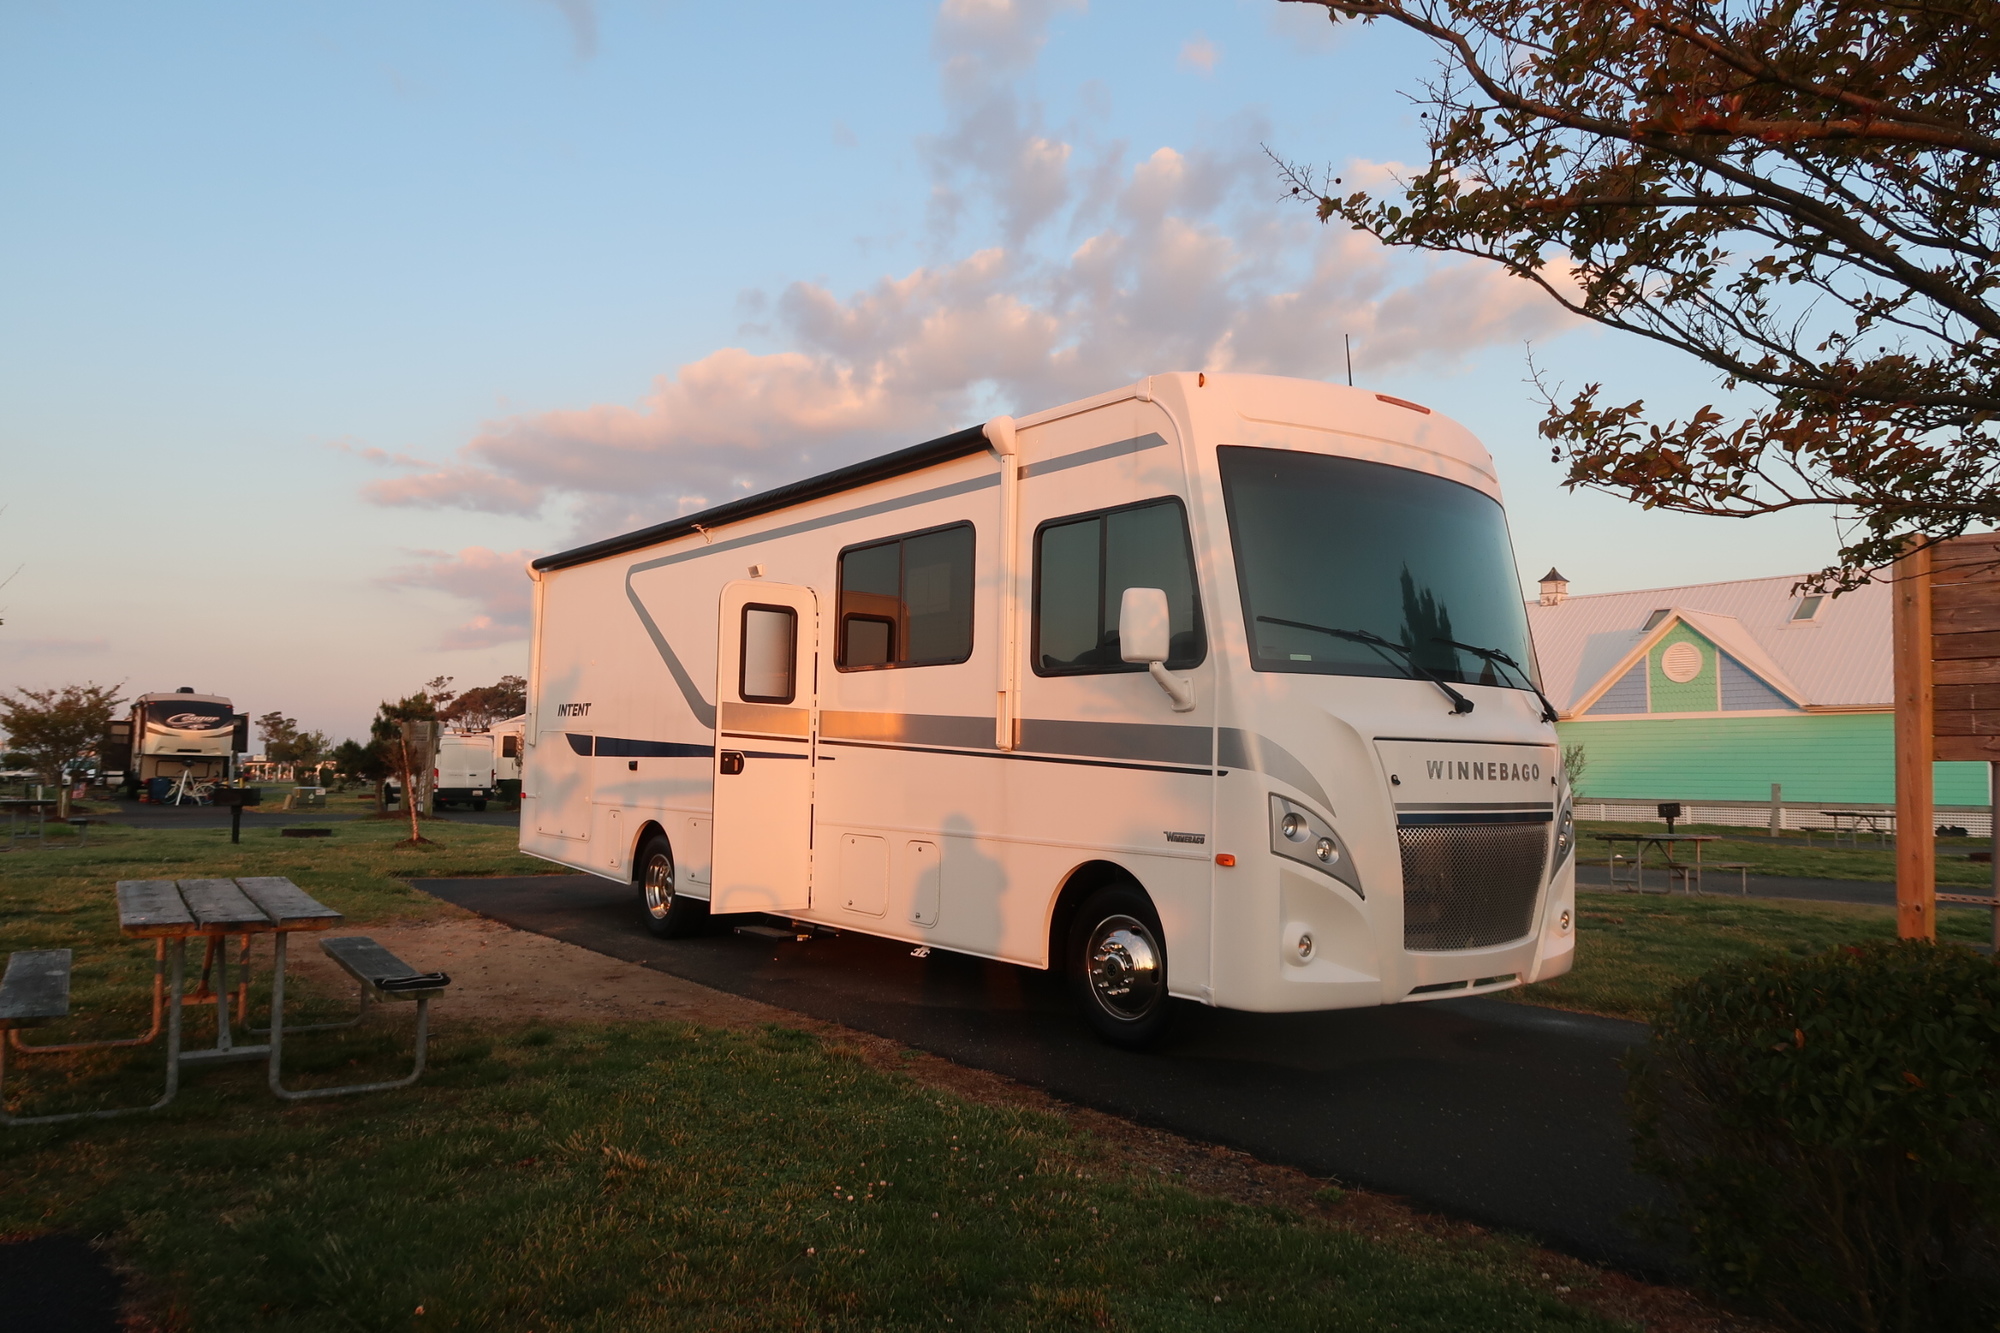 7 Reasons Why You Should Go RVing on Your Next Vacation